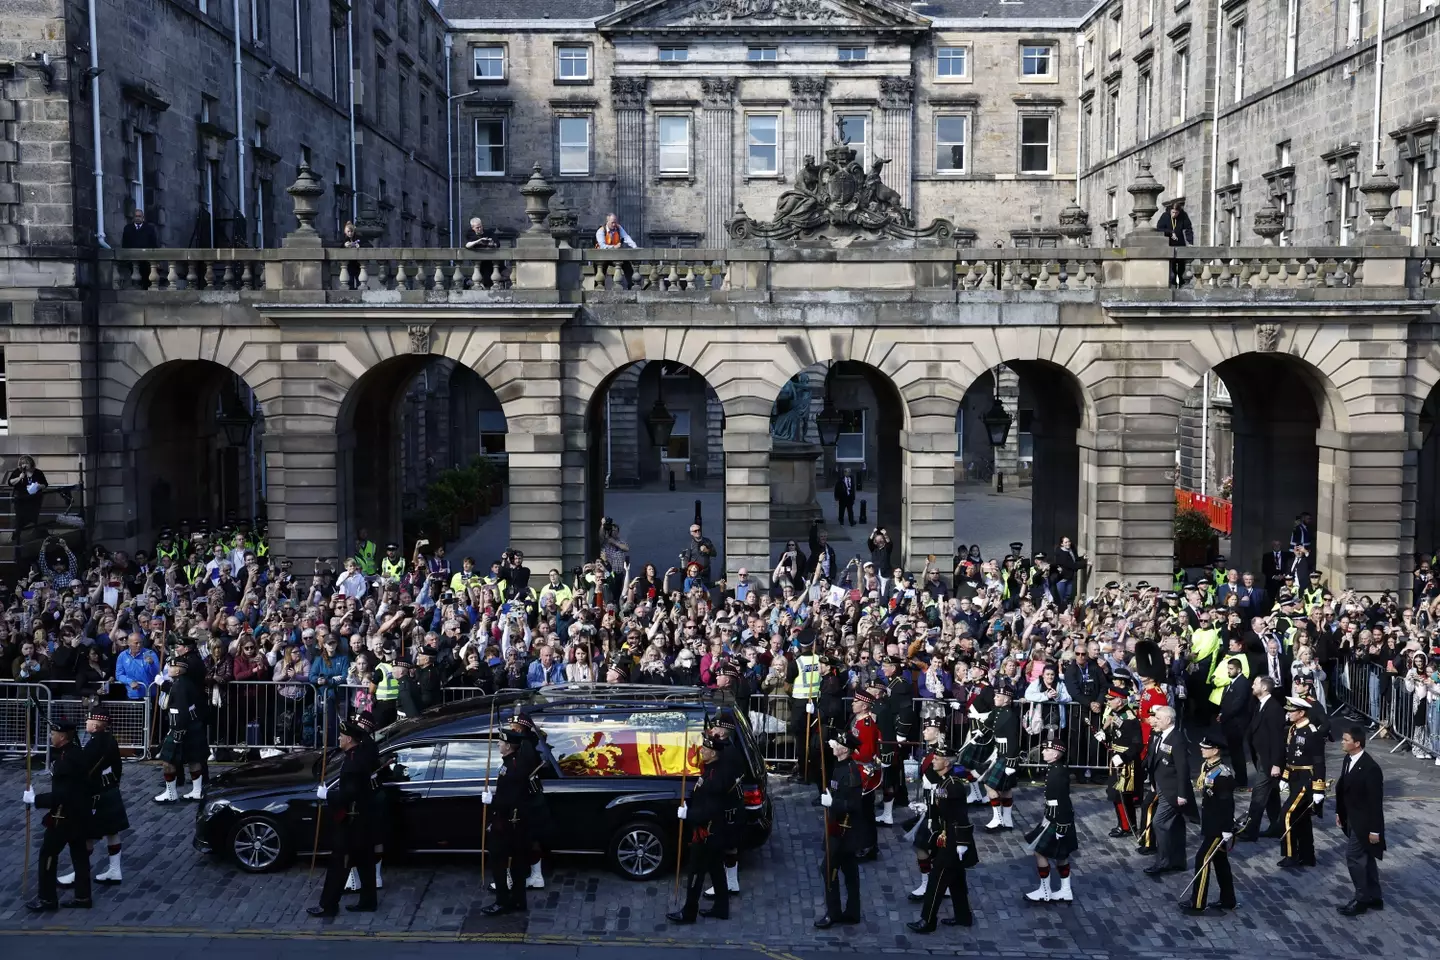 The Queen's coffin was led through Edinburgh today.